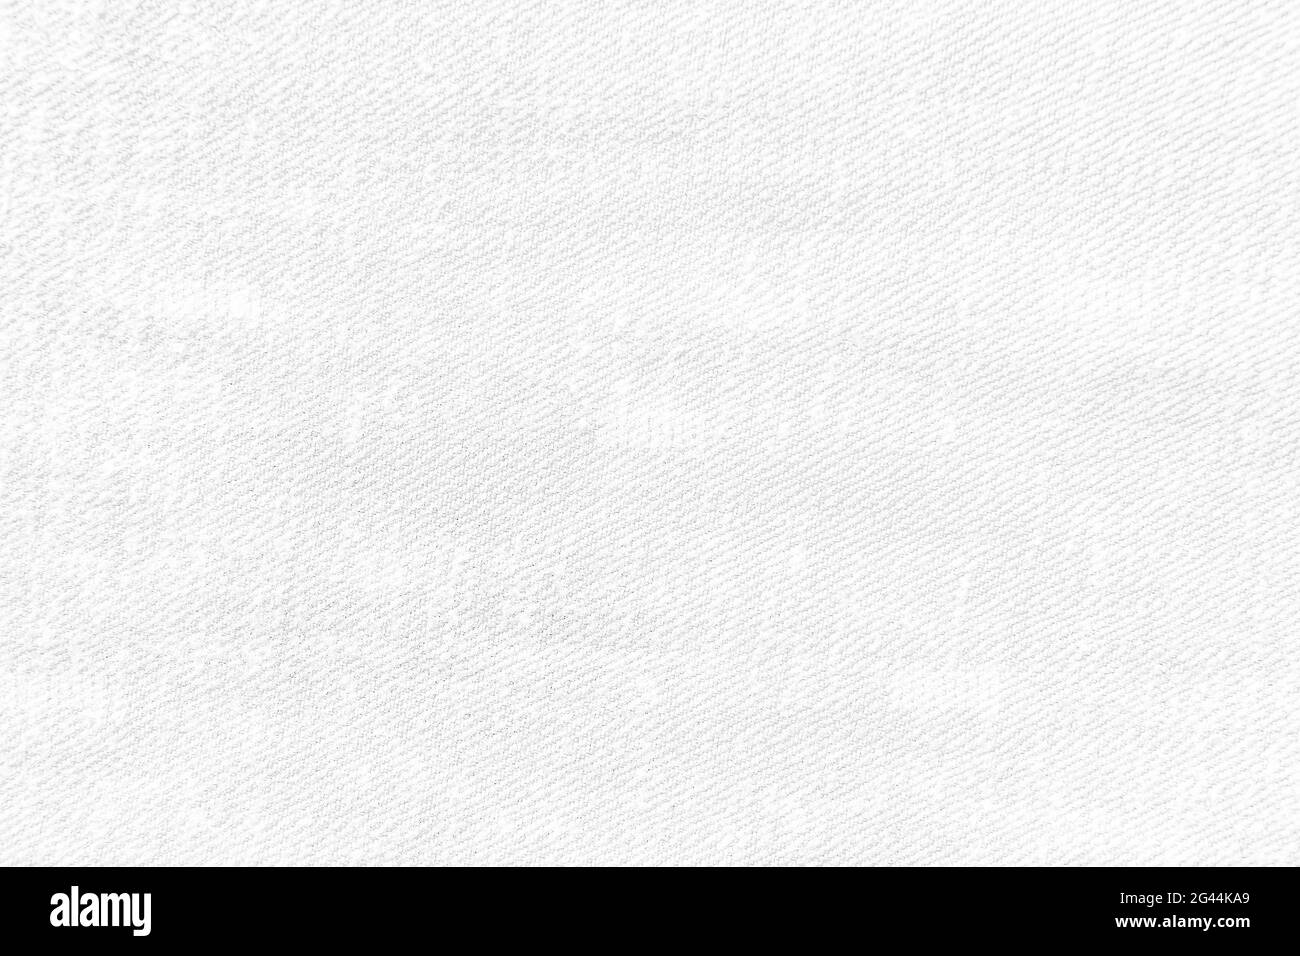 White Fabric Texture Abstract Cloth Background Stock Photo Alamy